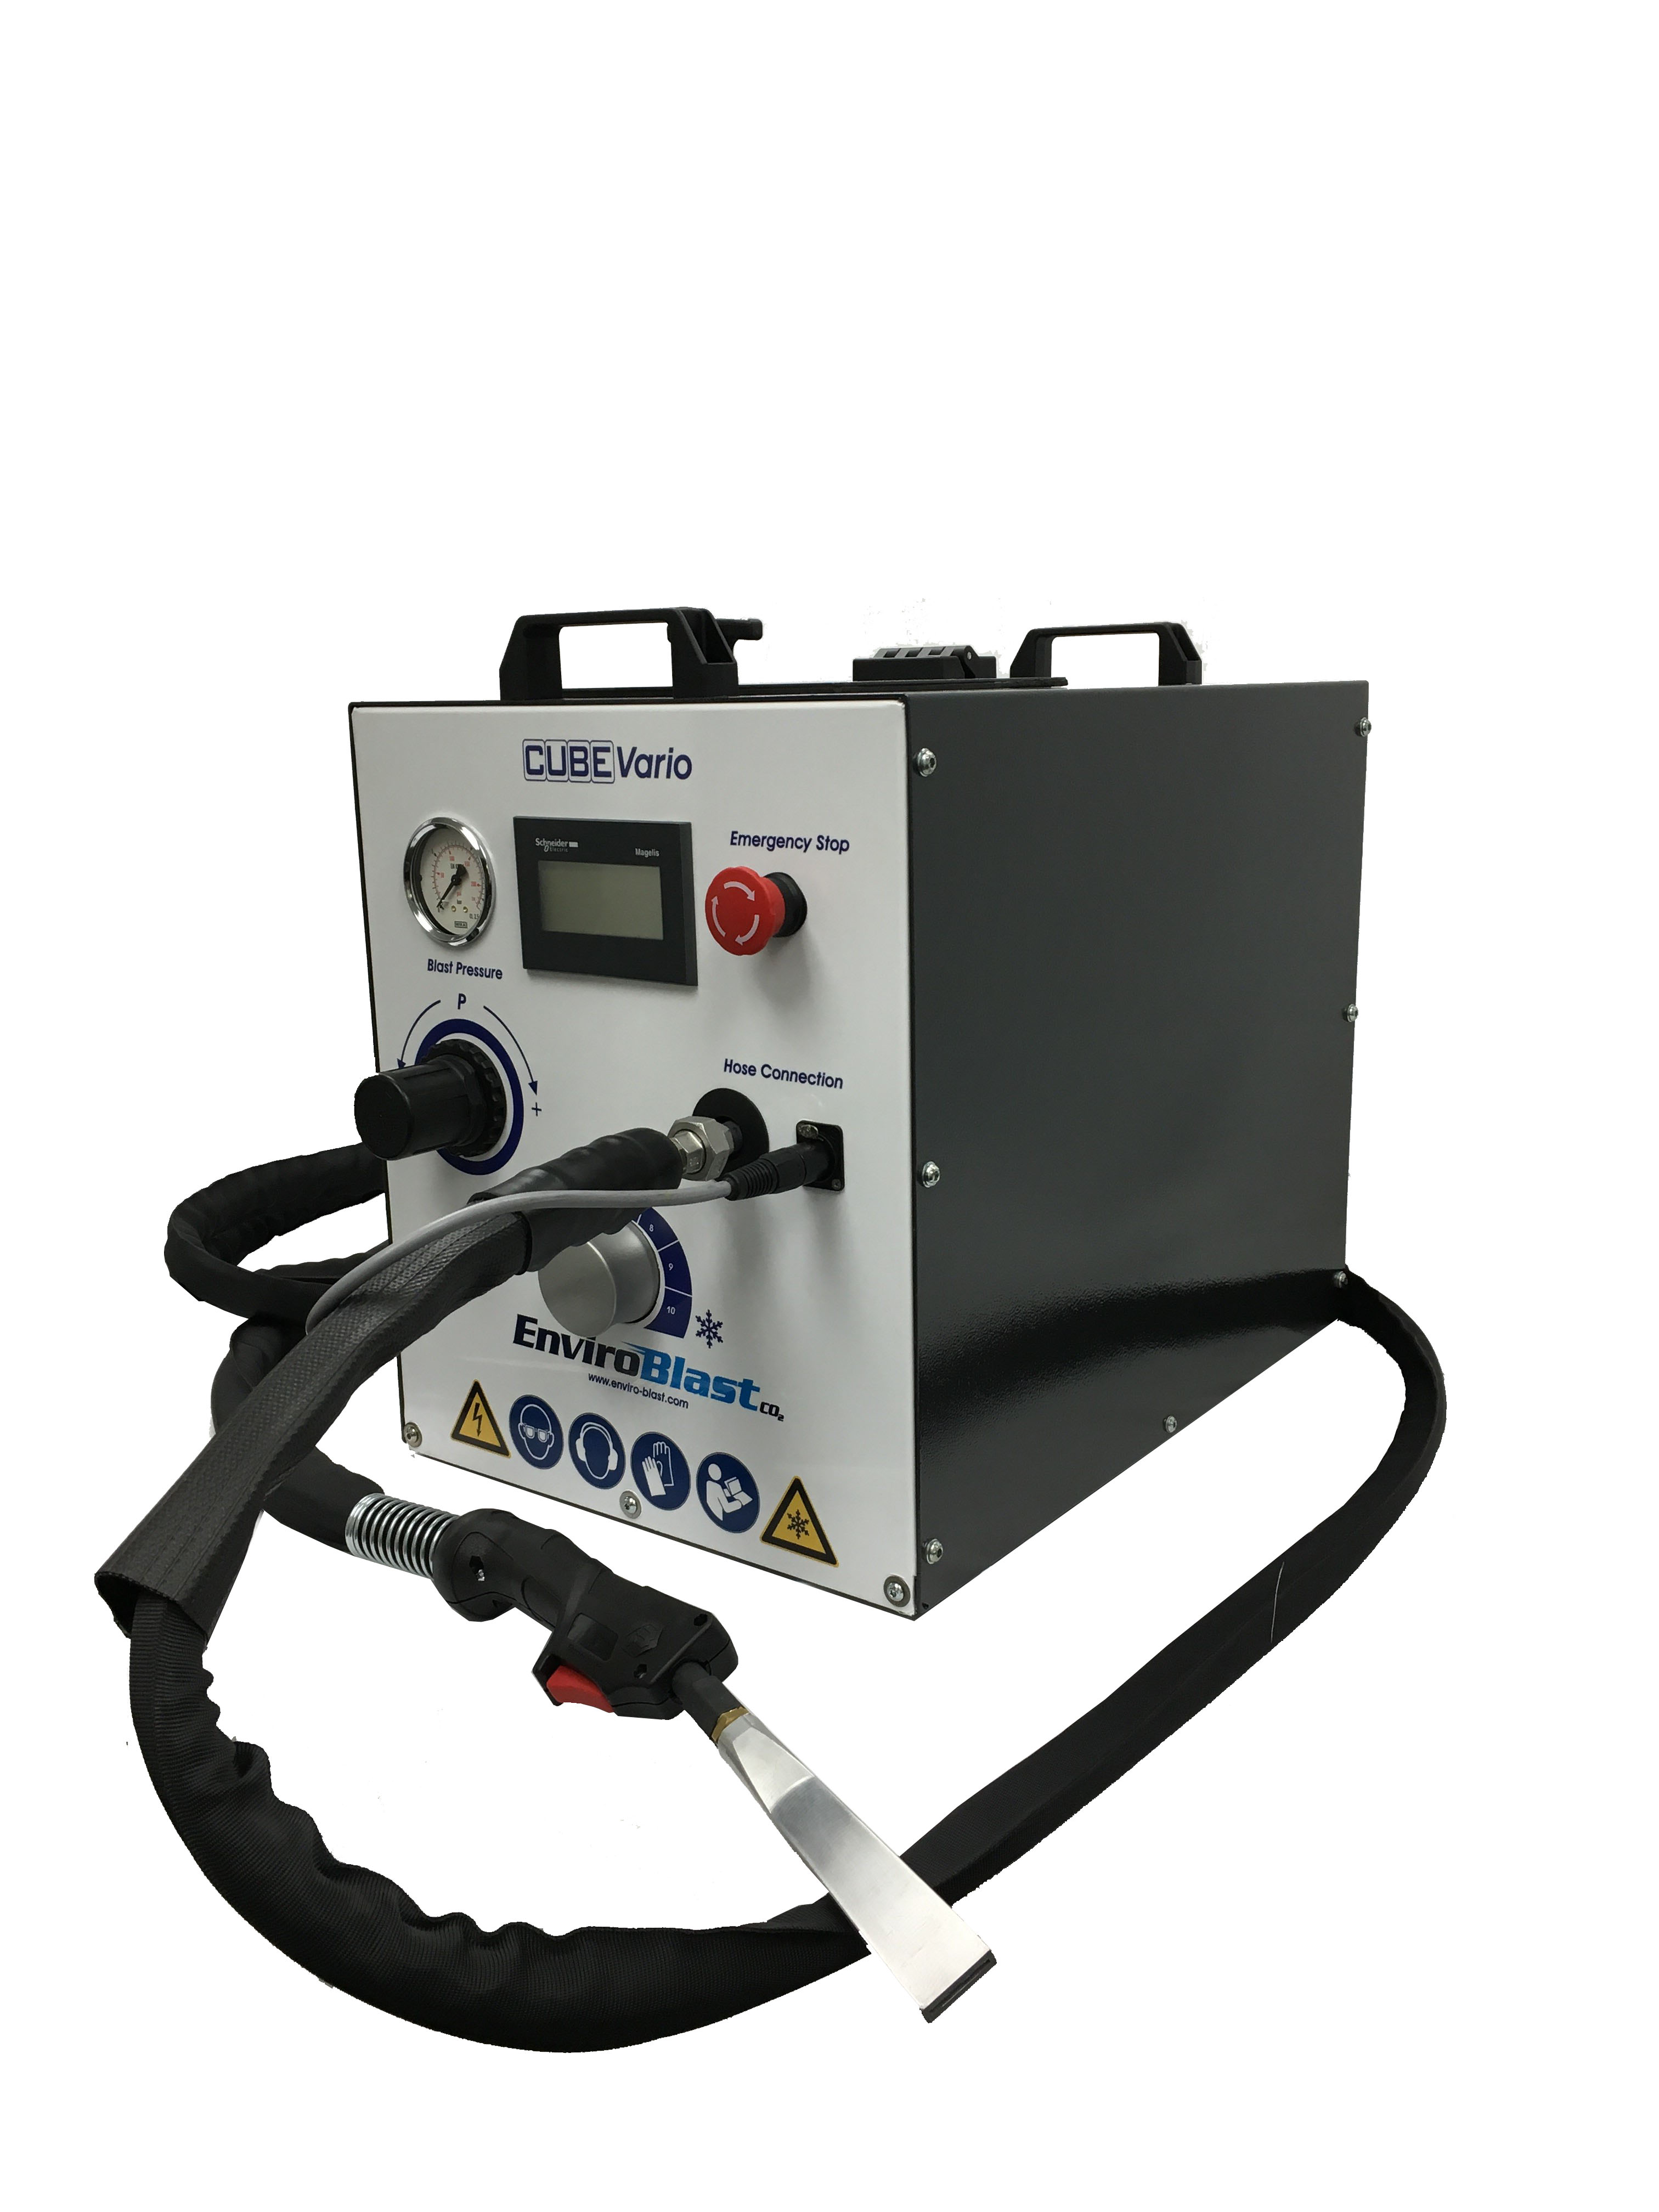 SM2000 Dry Ice Blasting Machine for Cars and Various Surfaces